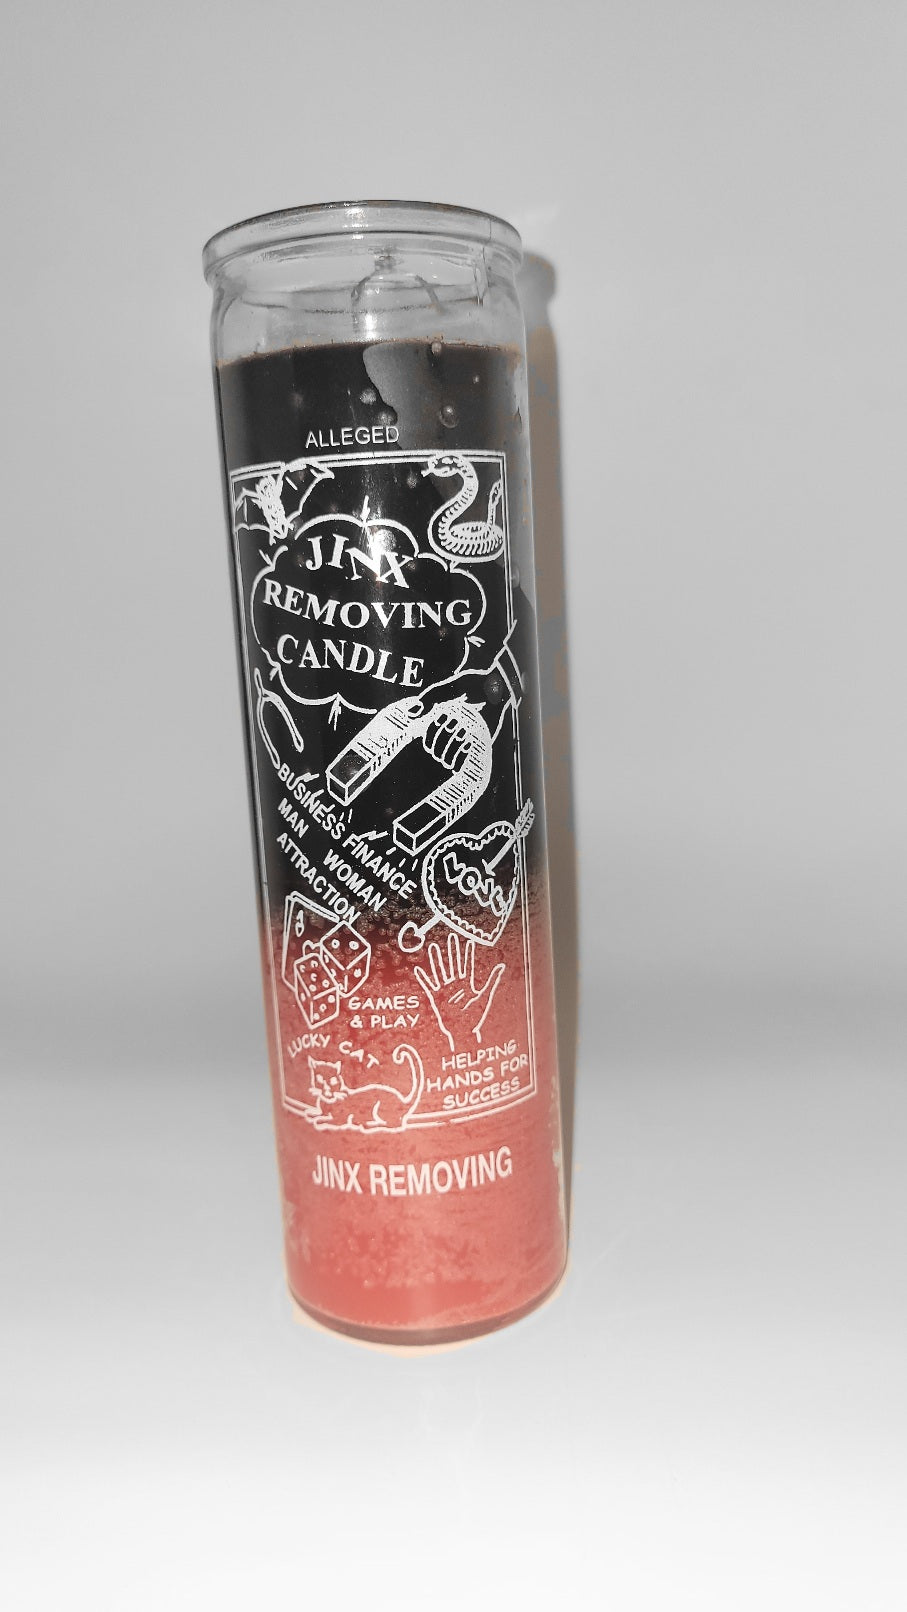 Jinx Removing Candle